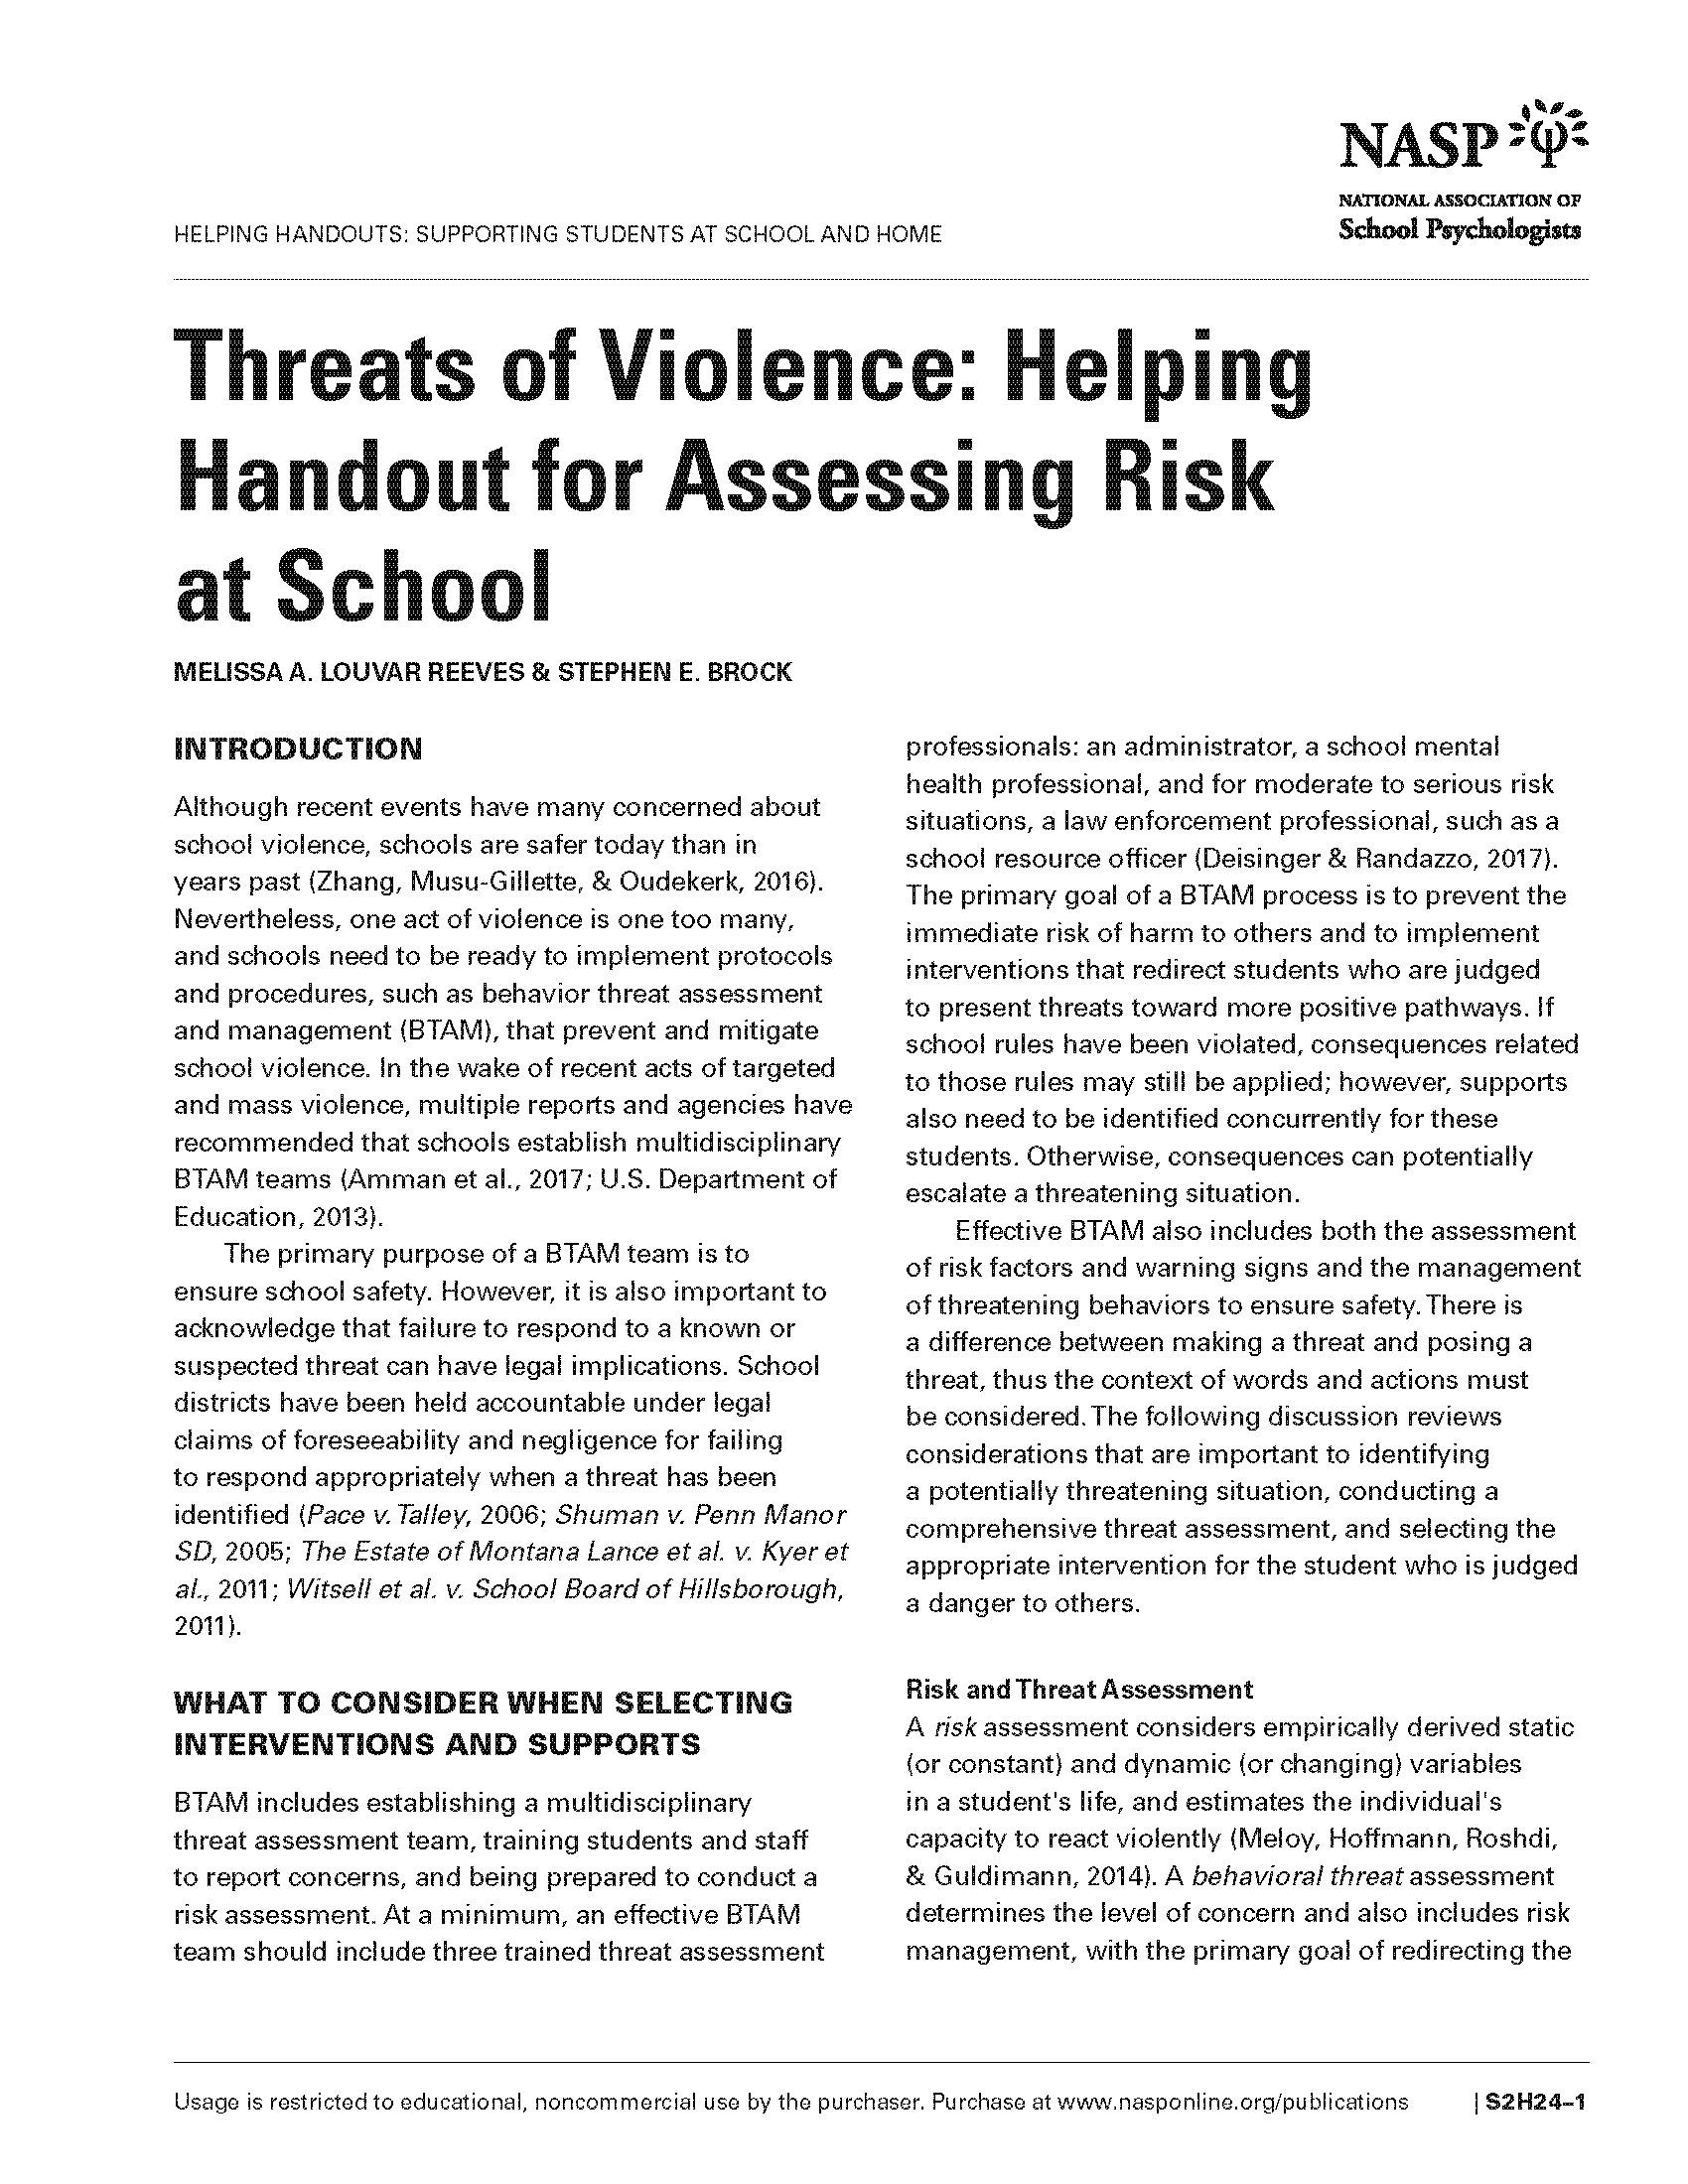 Threats of Violence: Helping Handout for Assessing Risk at School